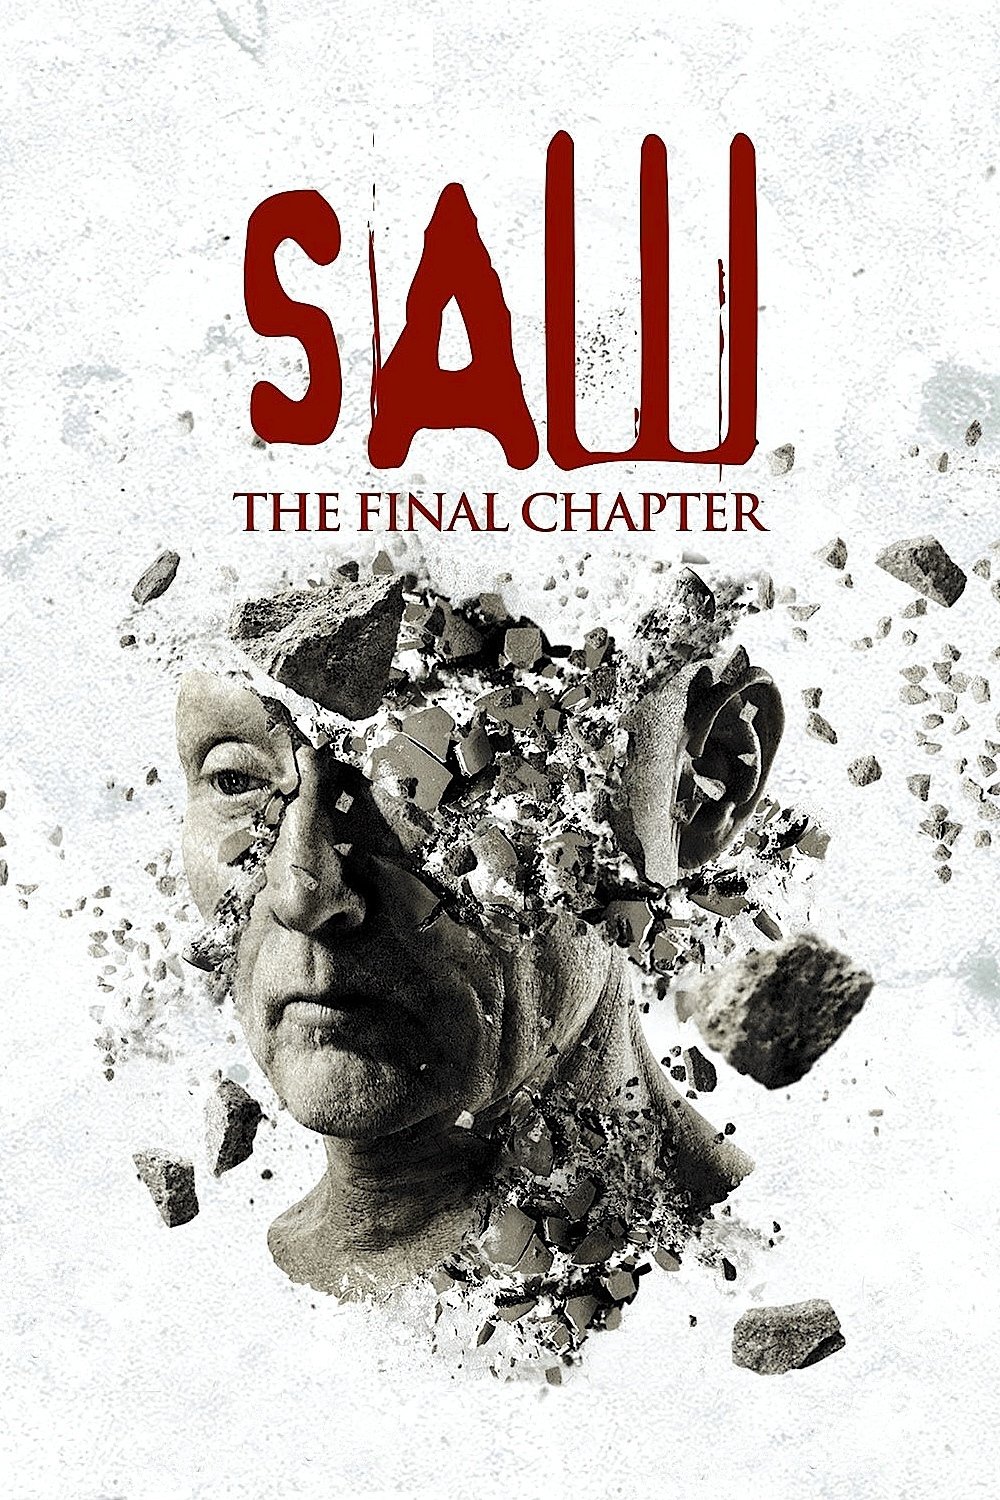 Poster for the movie "Saw: The Final Chapter"